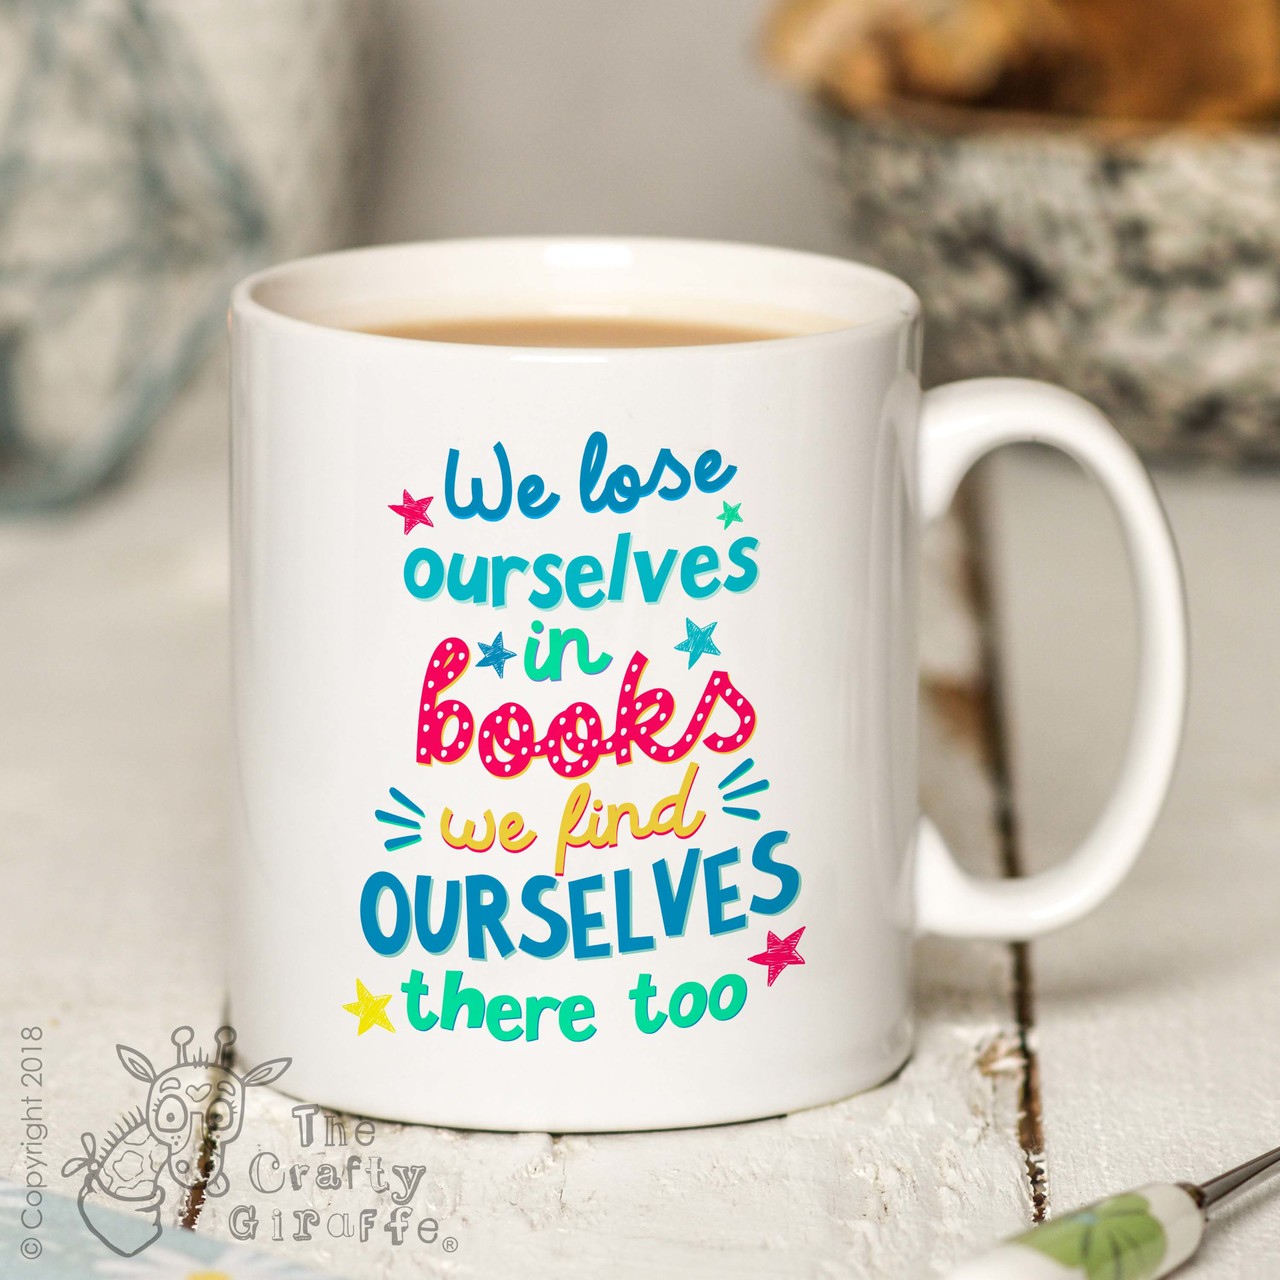 We lose ourselves in books we find ourselves there too Mug